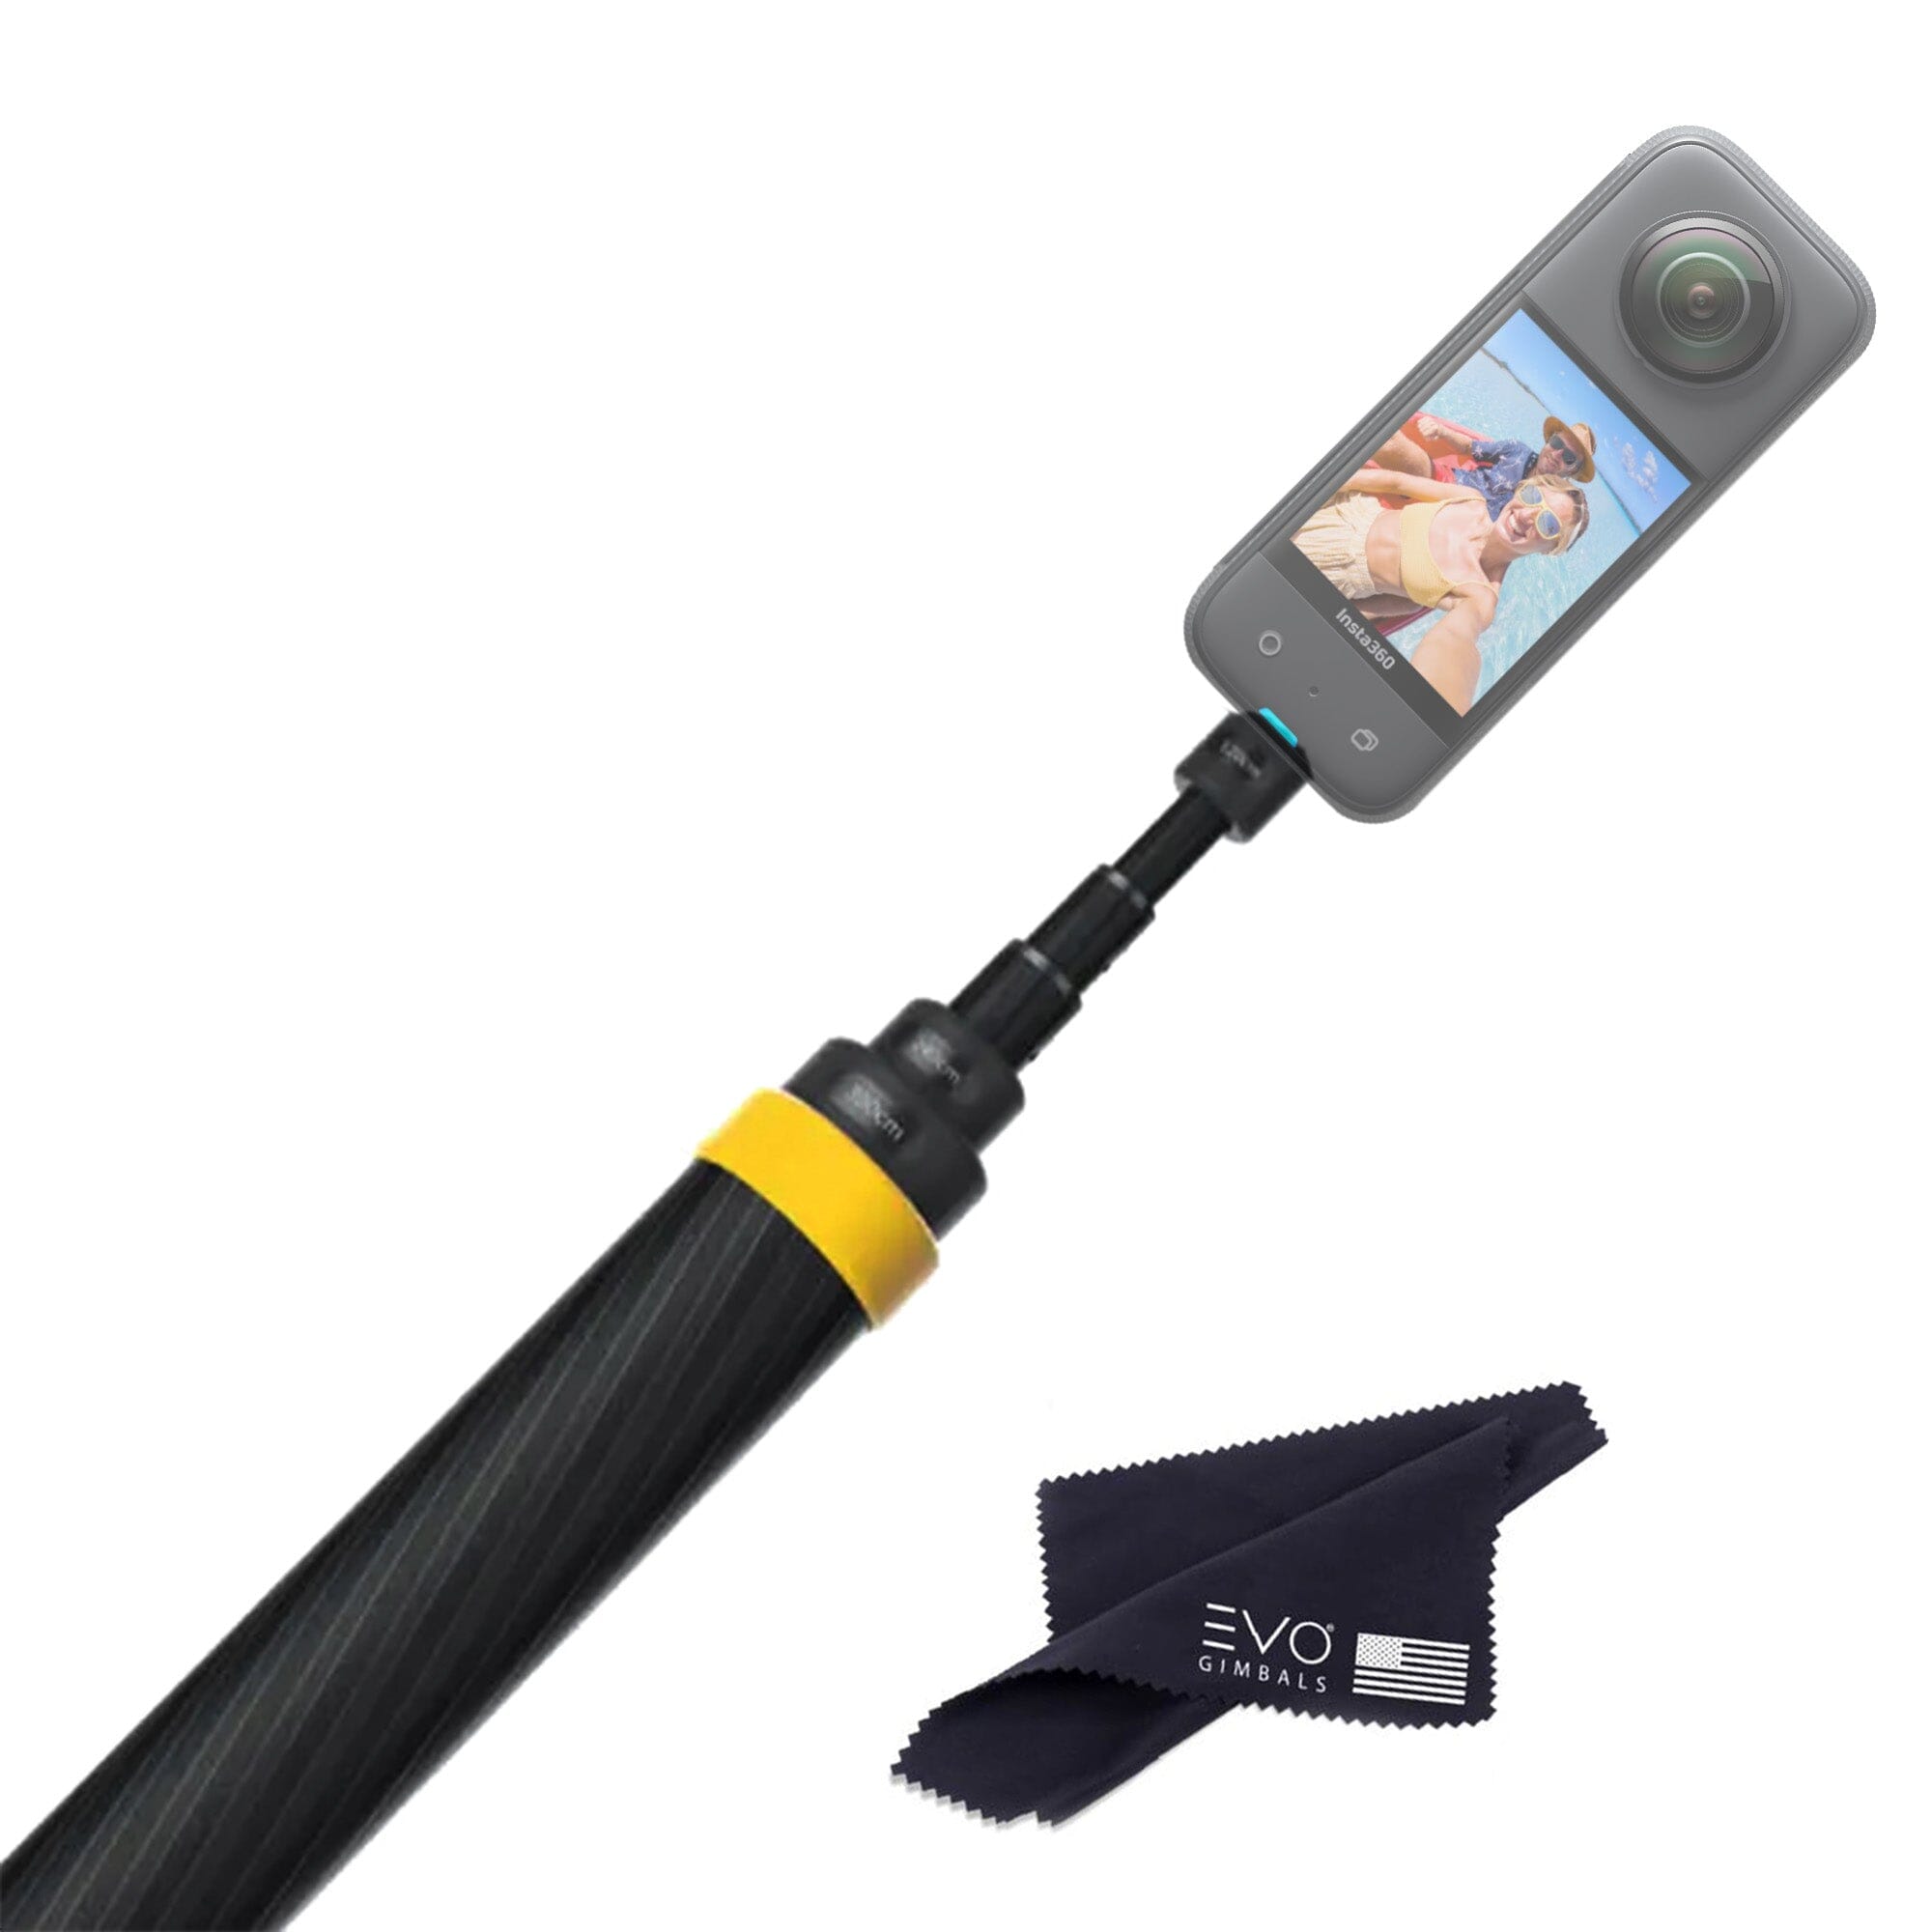 Insta360 Extended Selfie Stick for X3, ONE RS/X2/R/X, and ONE (14 to 1